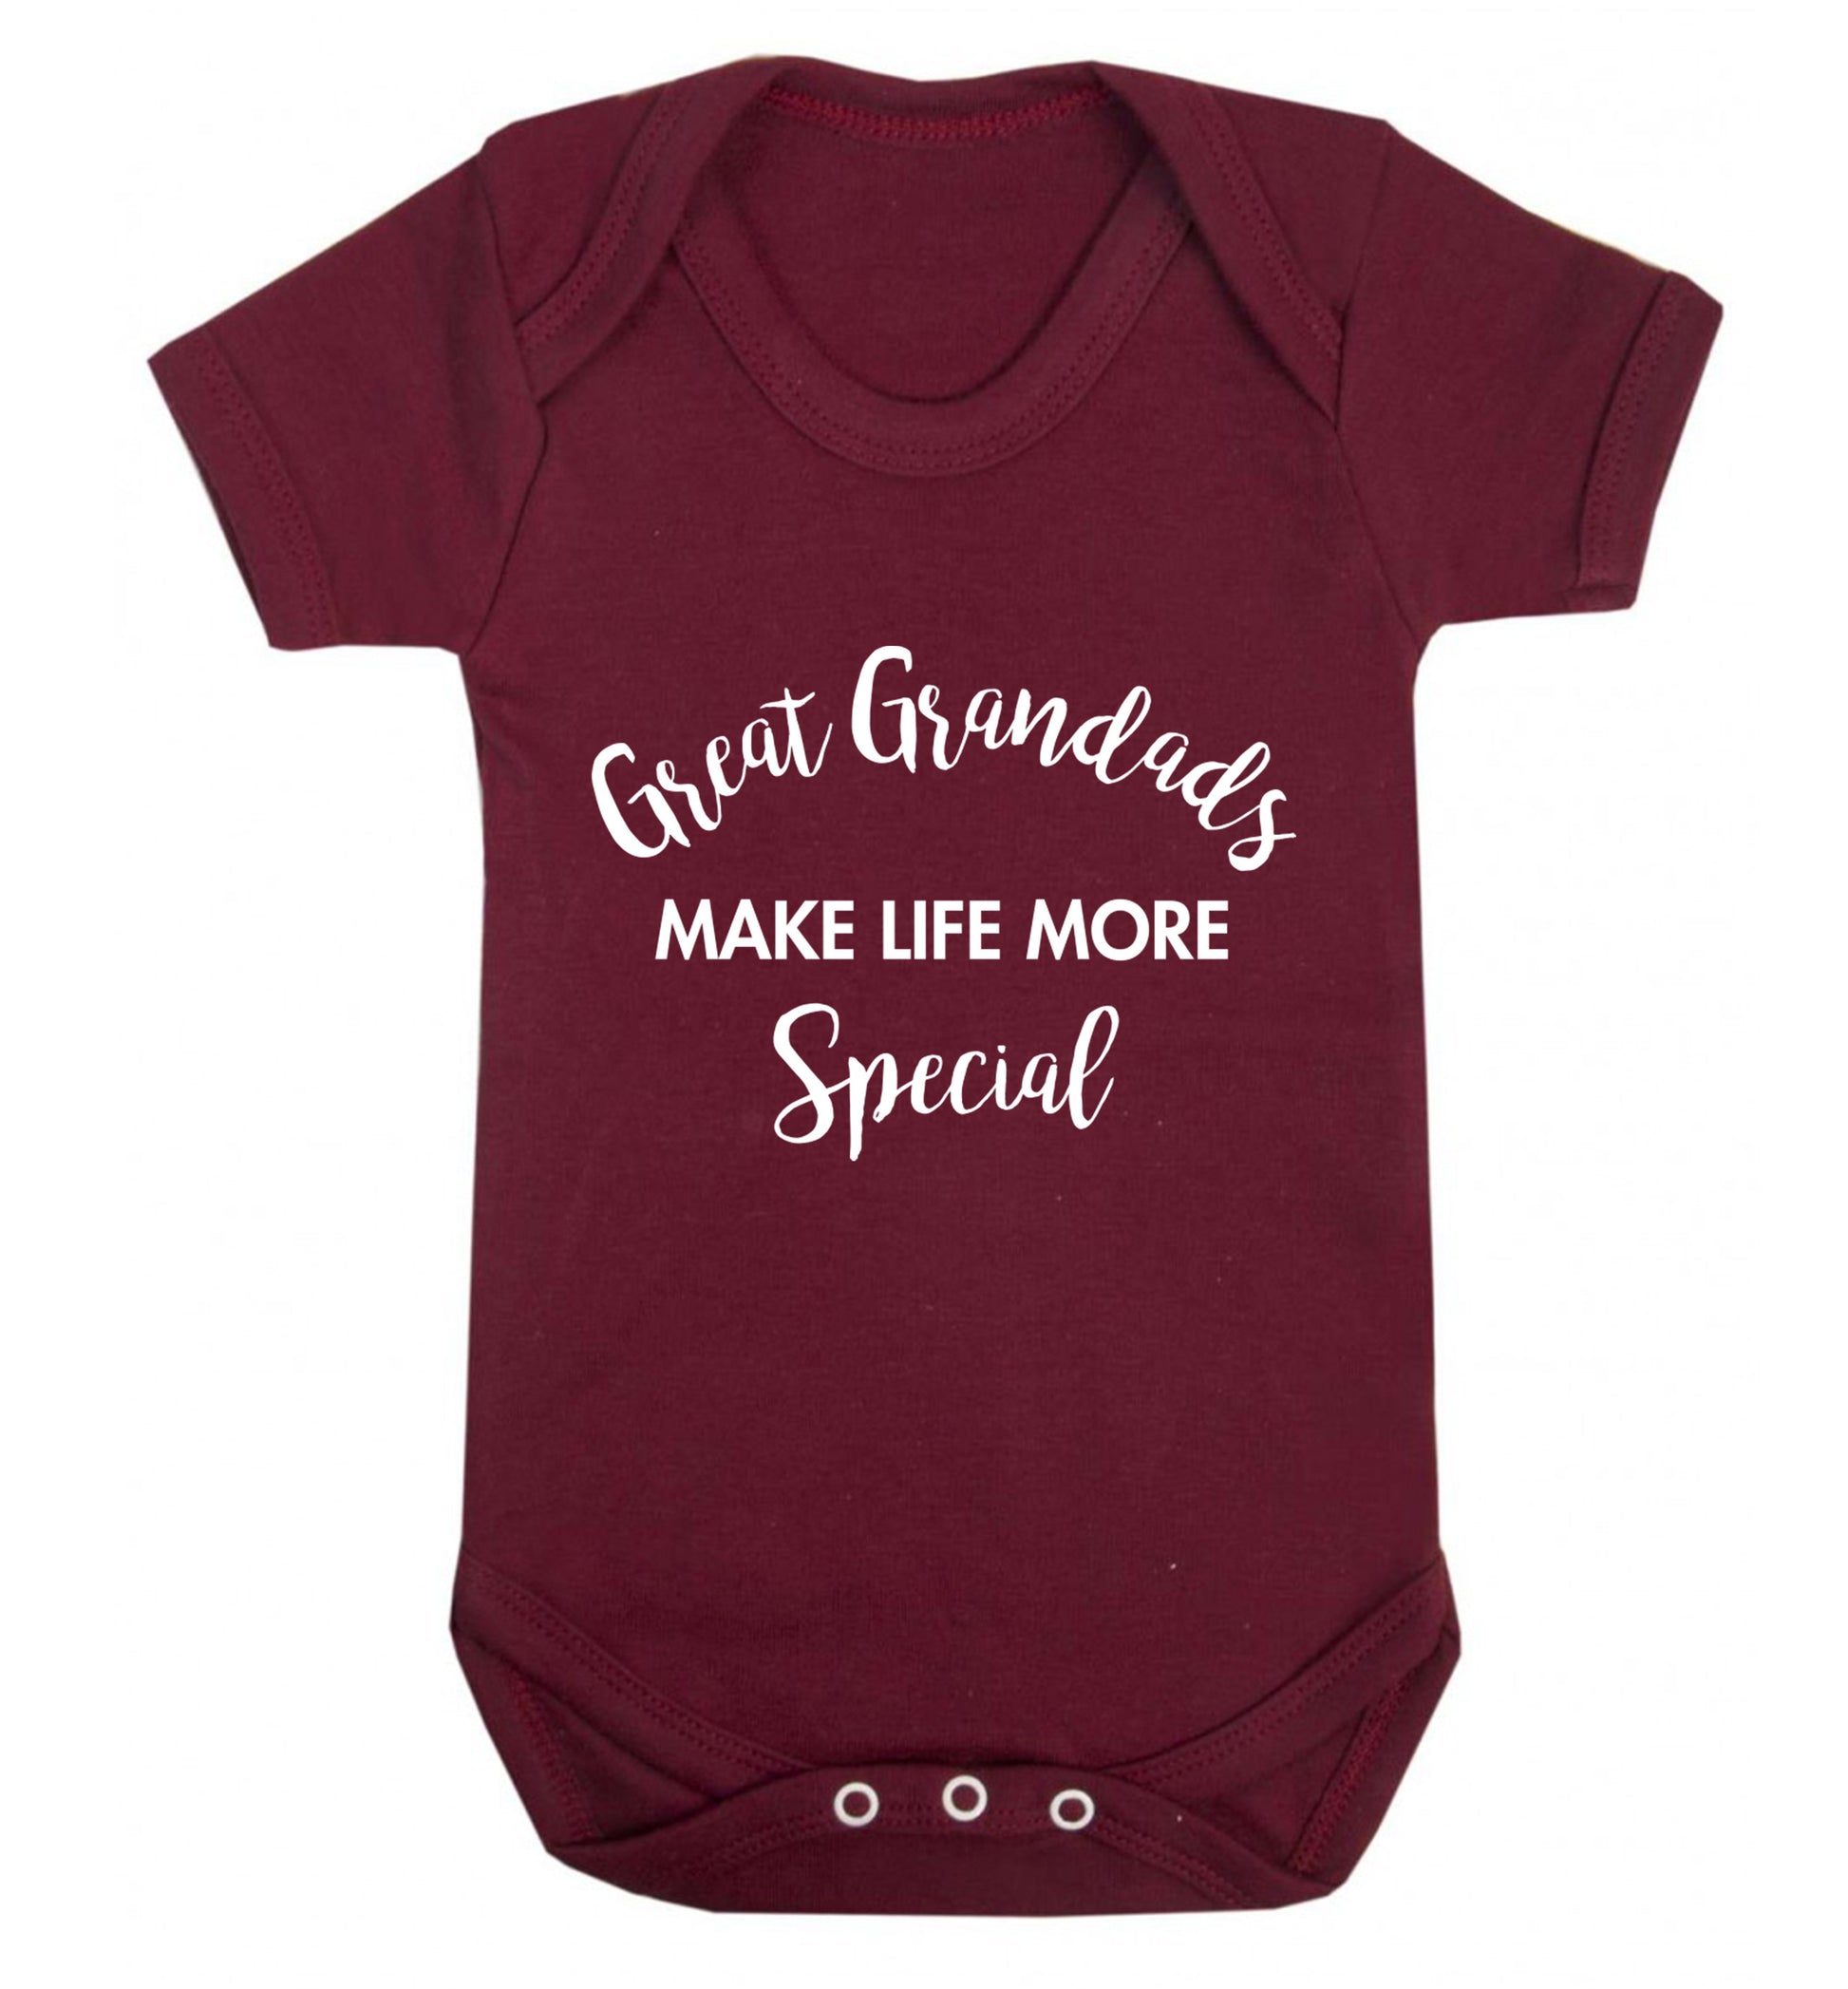 Great Grandads make life more special Baby Vest maroon 18-24 months